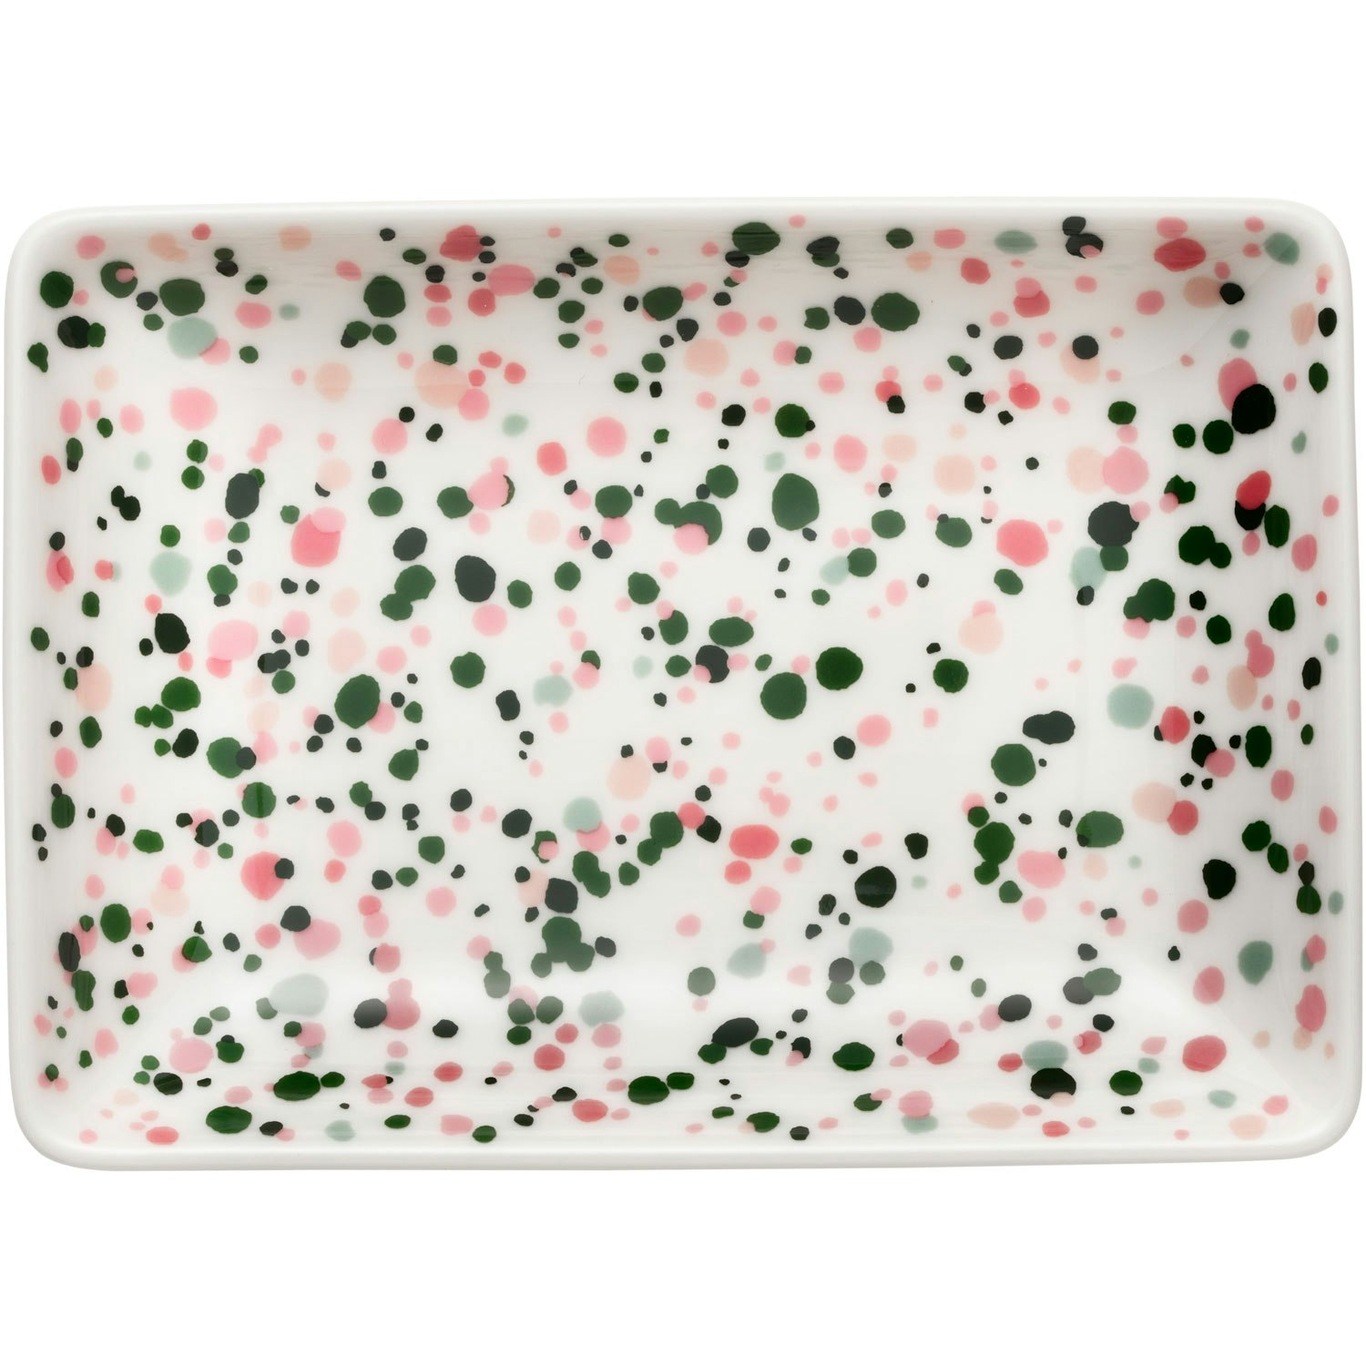 Oiva Toikka Collection Helle Plate Pink / Green, A6 10x15 cm